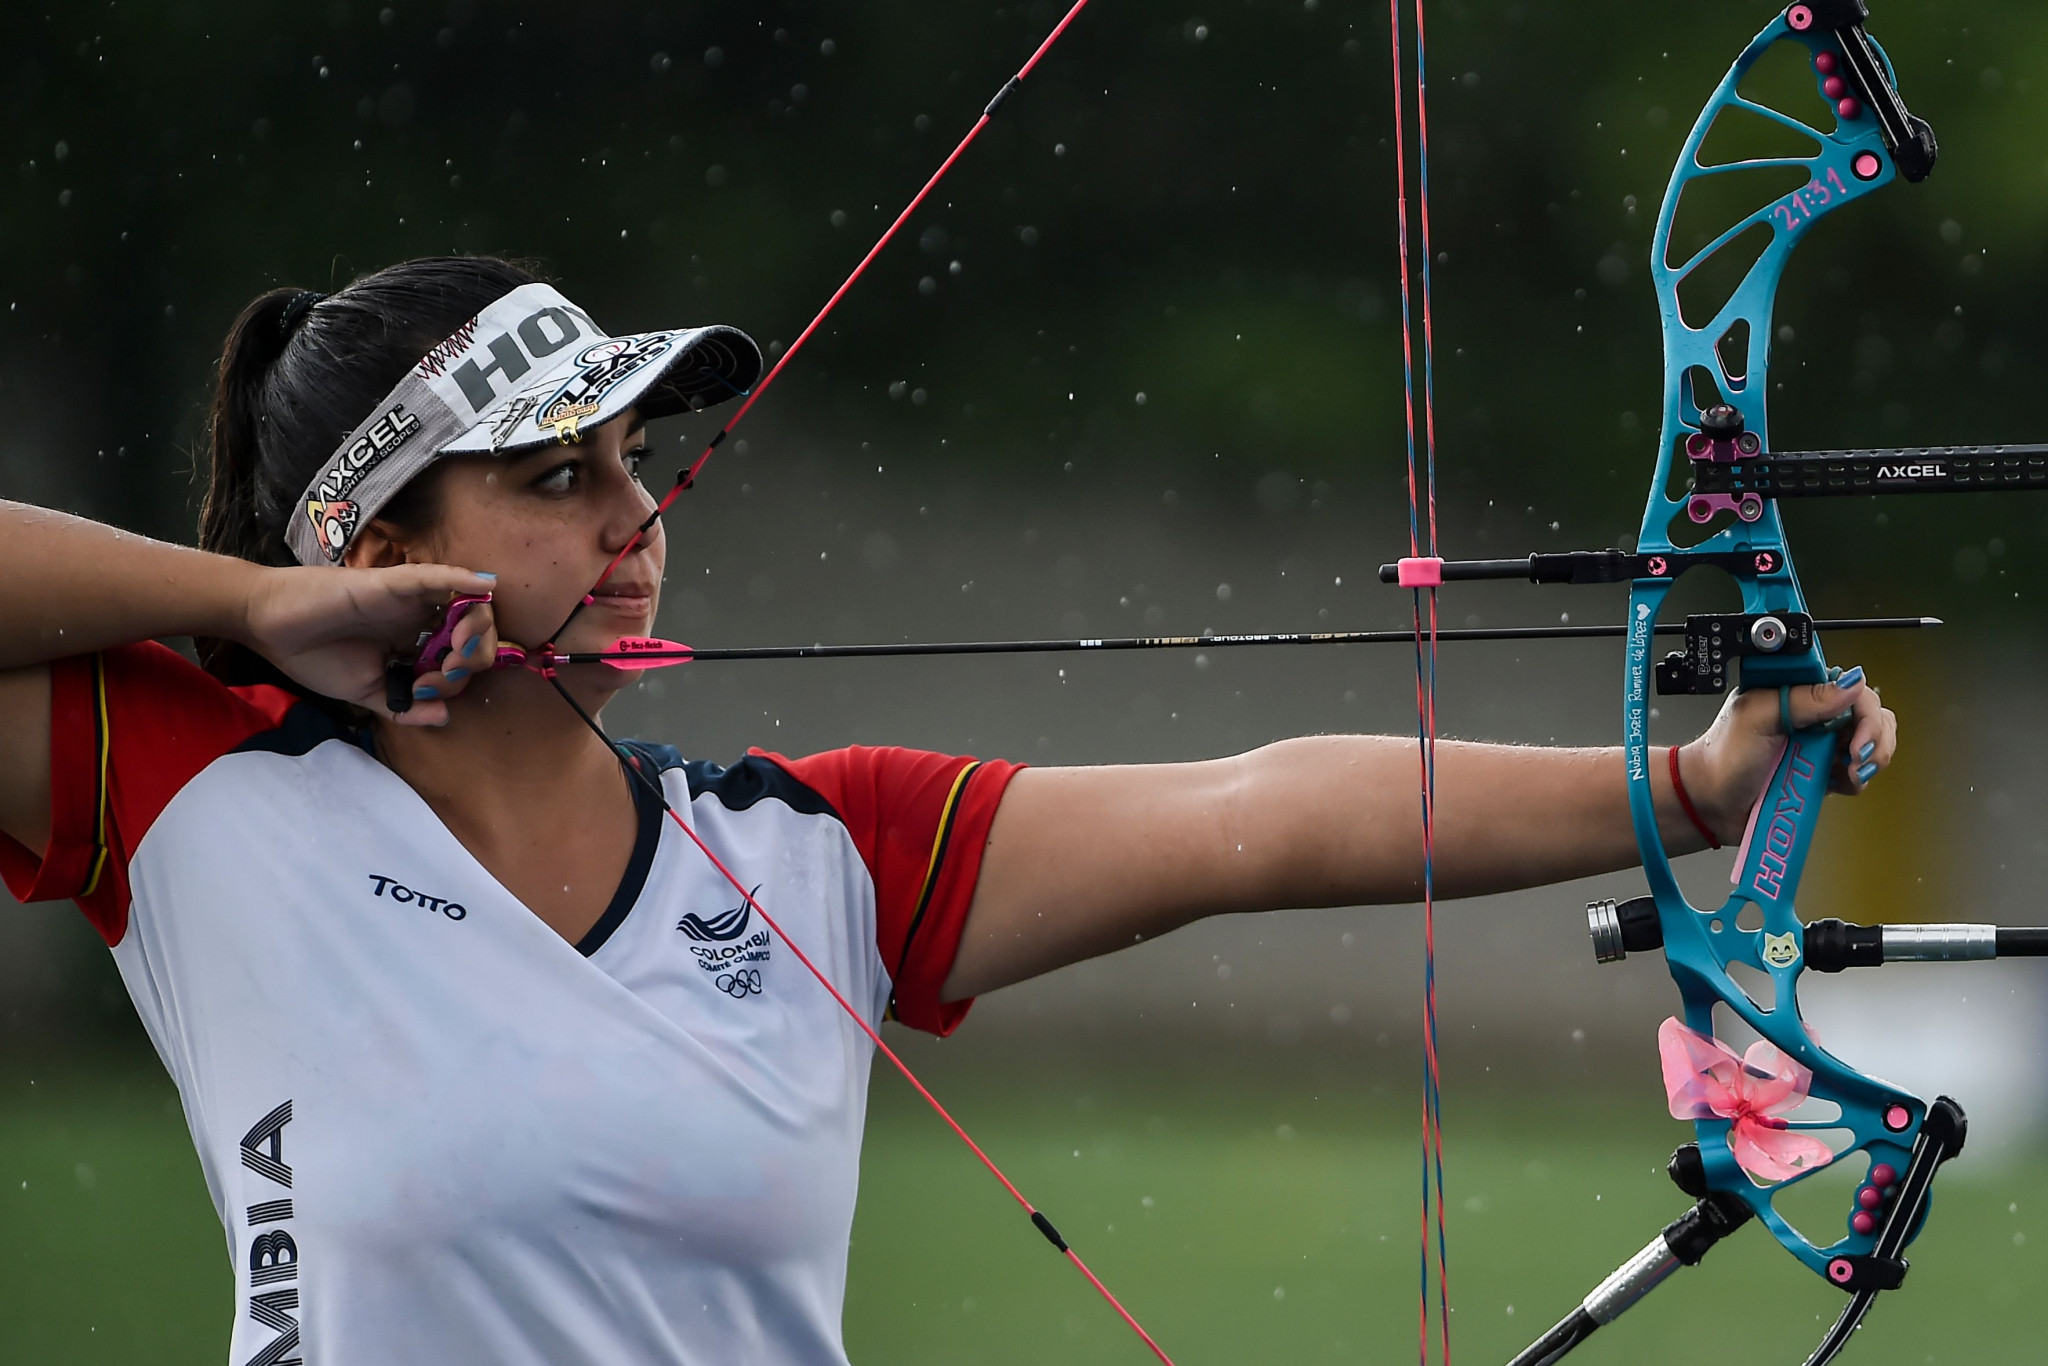 Lopez leads compound qualification on home soil at Pan American Archery Championships